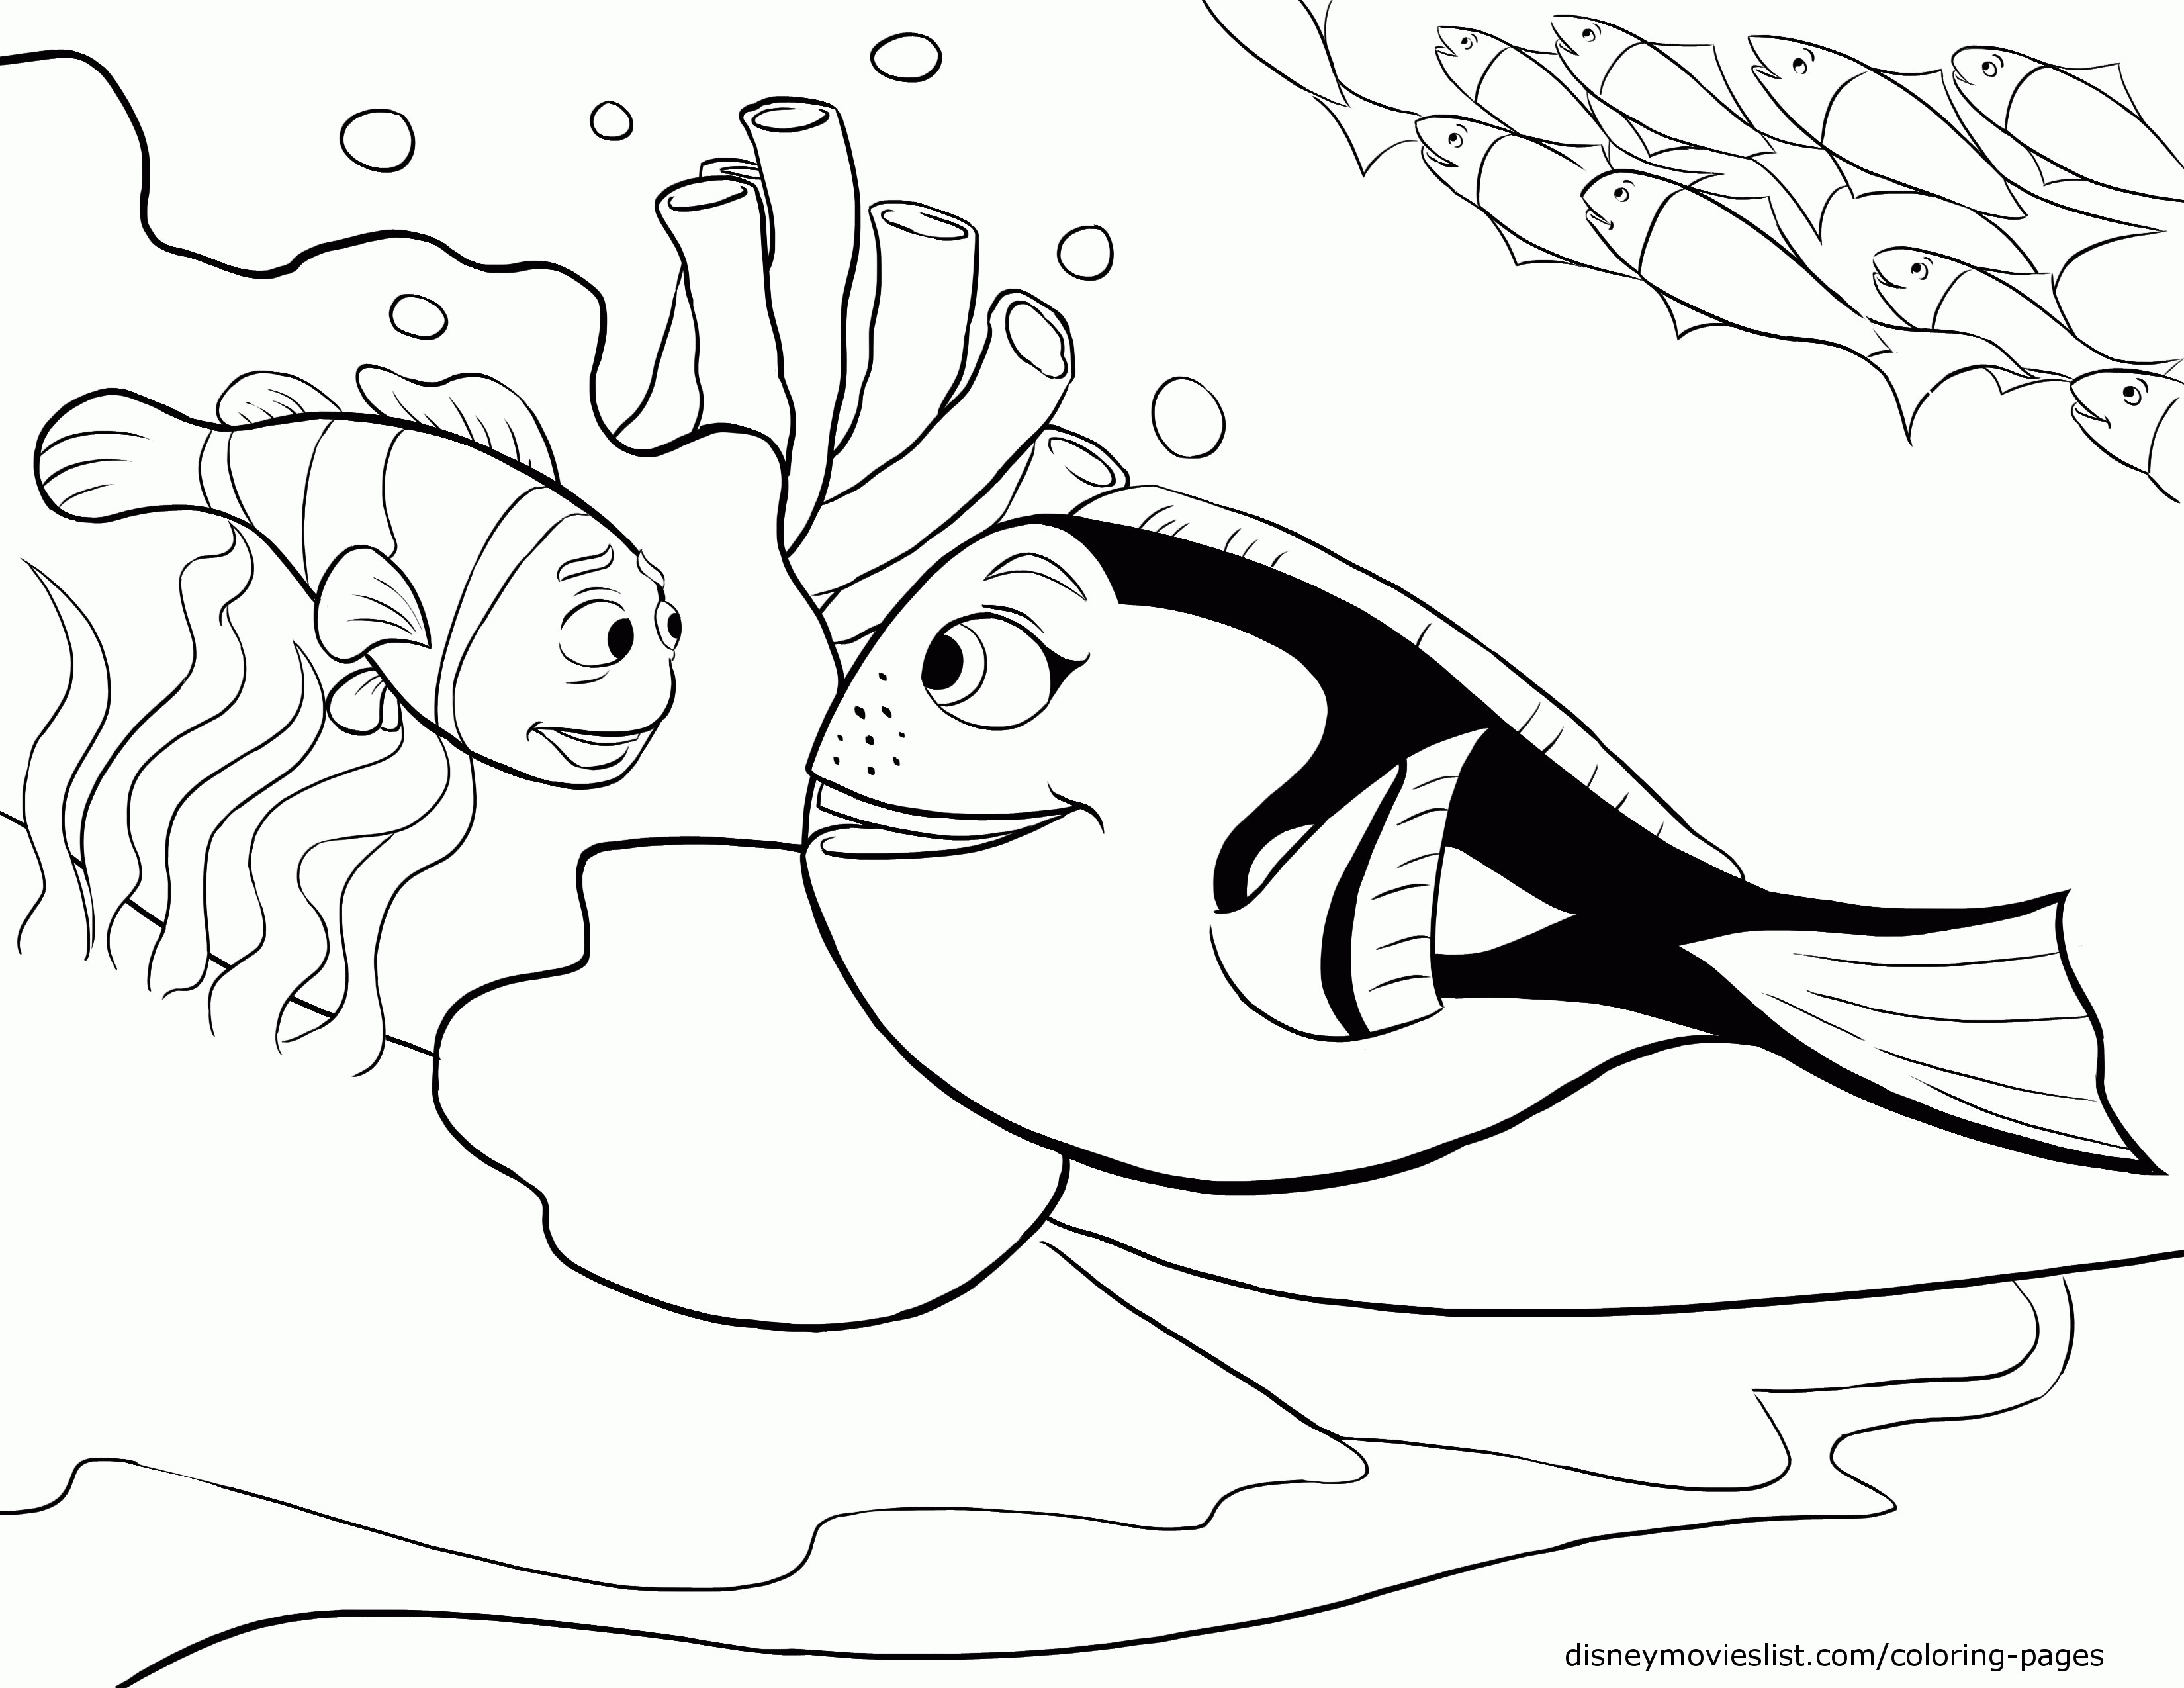 Disney's Finding Nemo Coloring Pages Sheet, Free Disney Printable ...